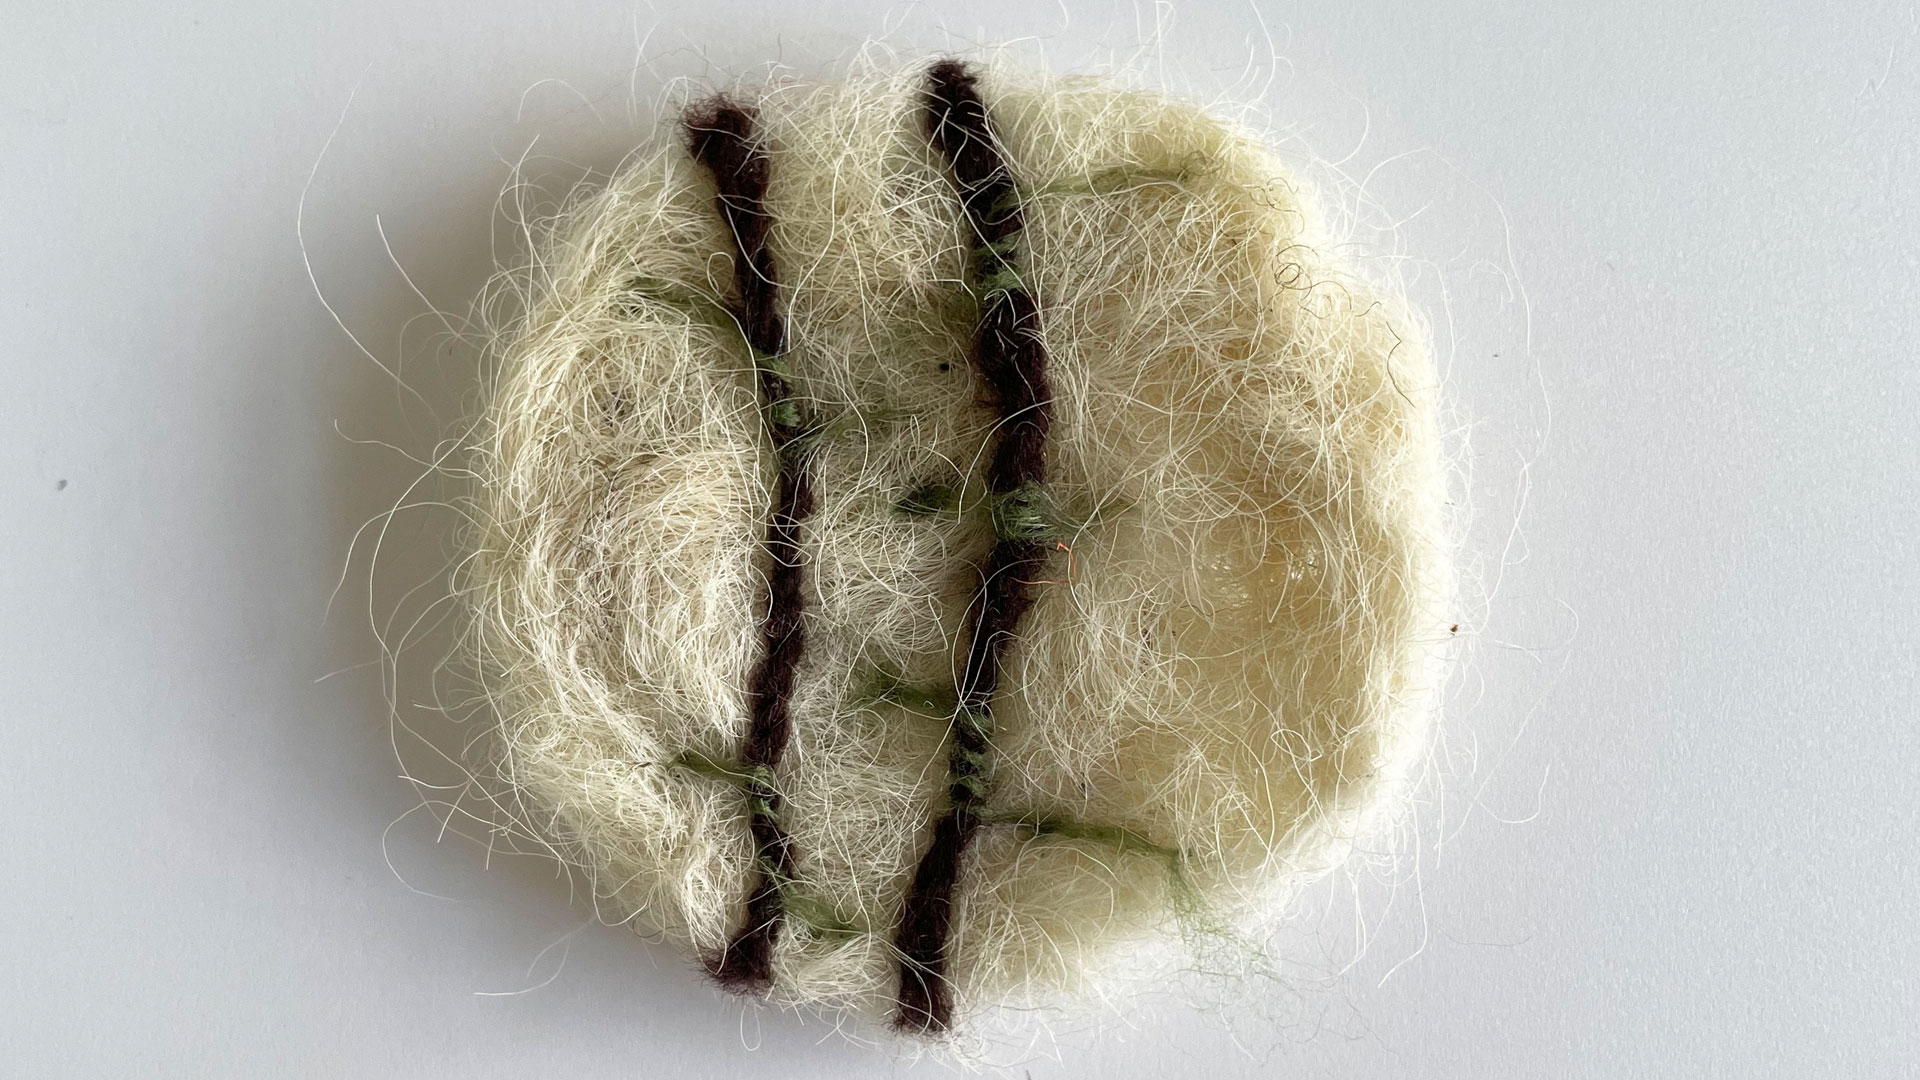 A circular brooch made of white felted wool with two brown stripes with green decoration, on a white background